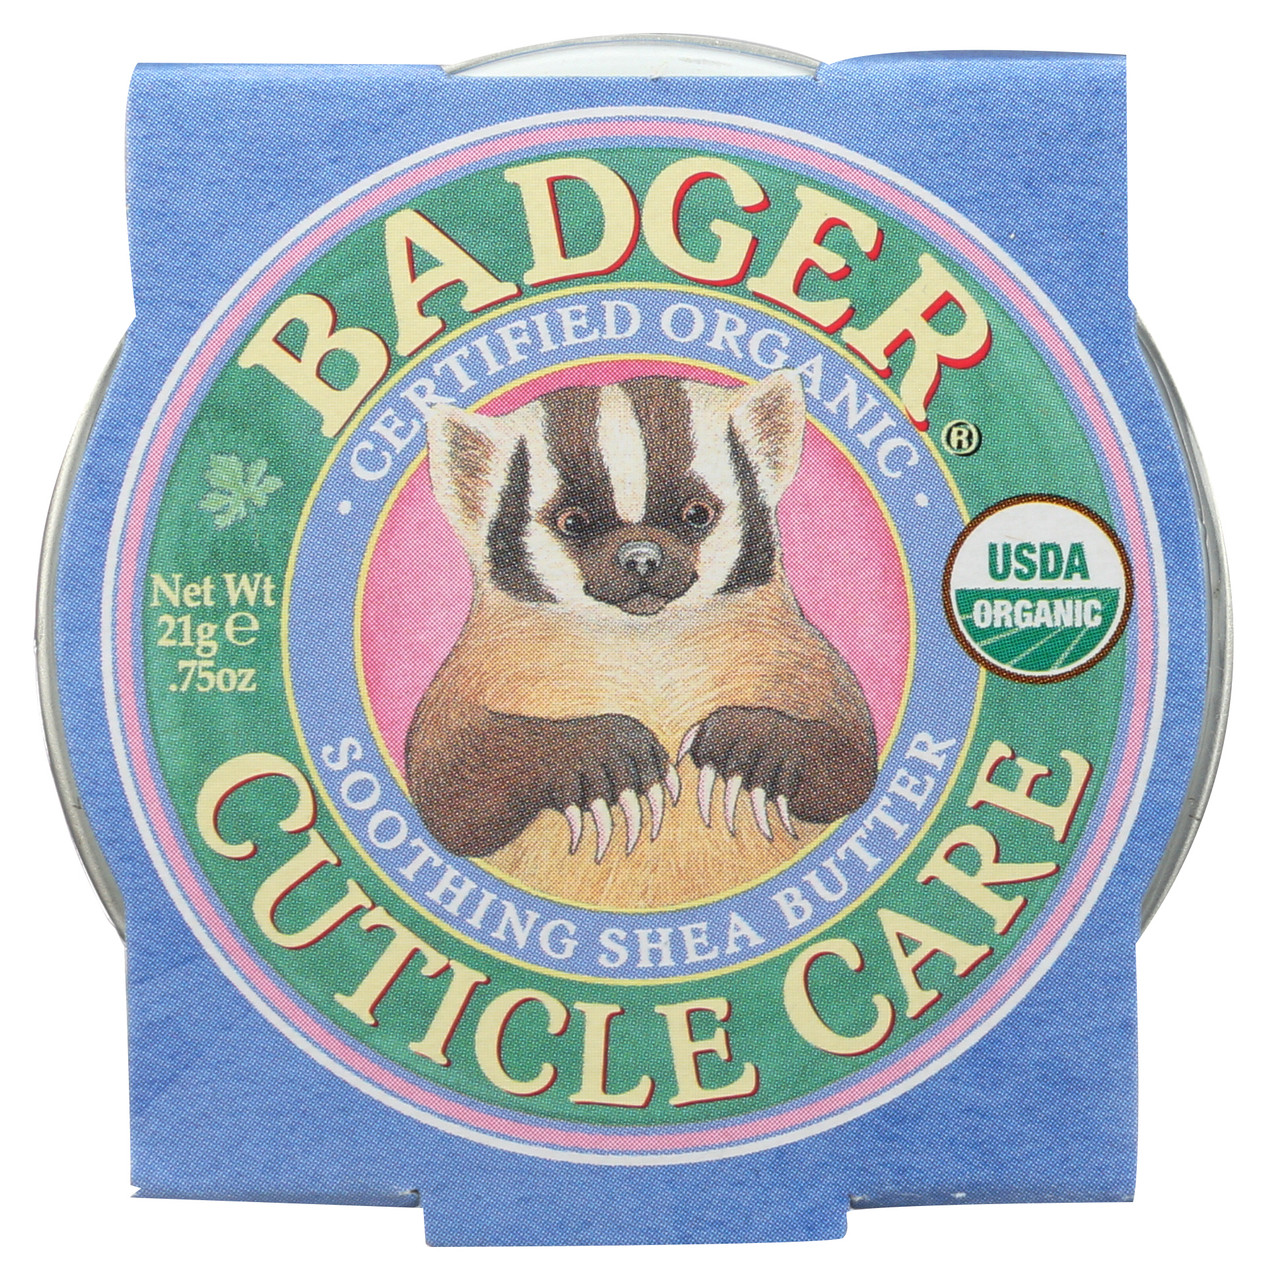 Cuticle Care Soothing Shea Butter Organic 21 Gram